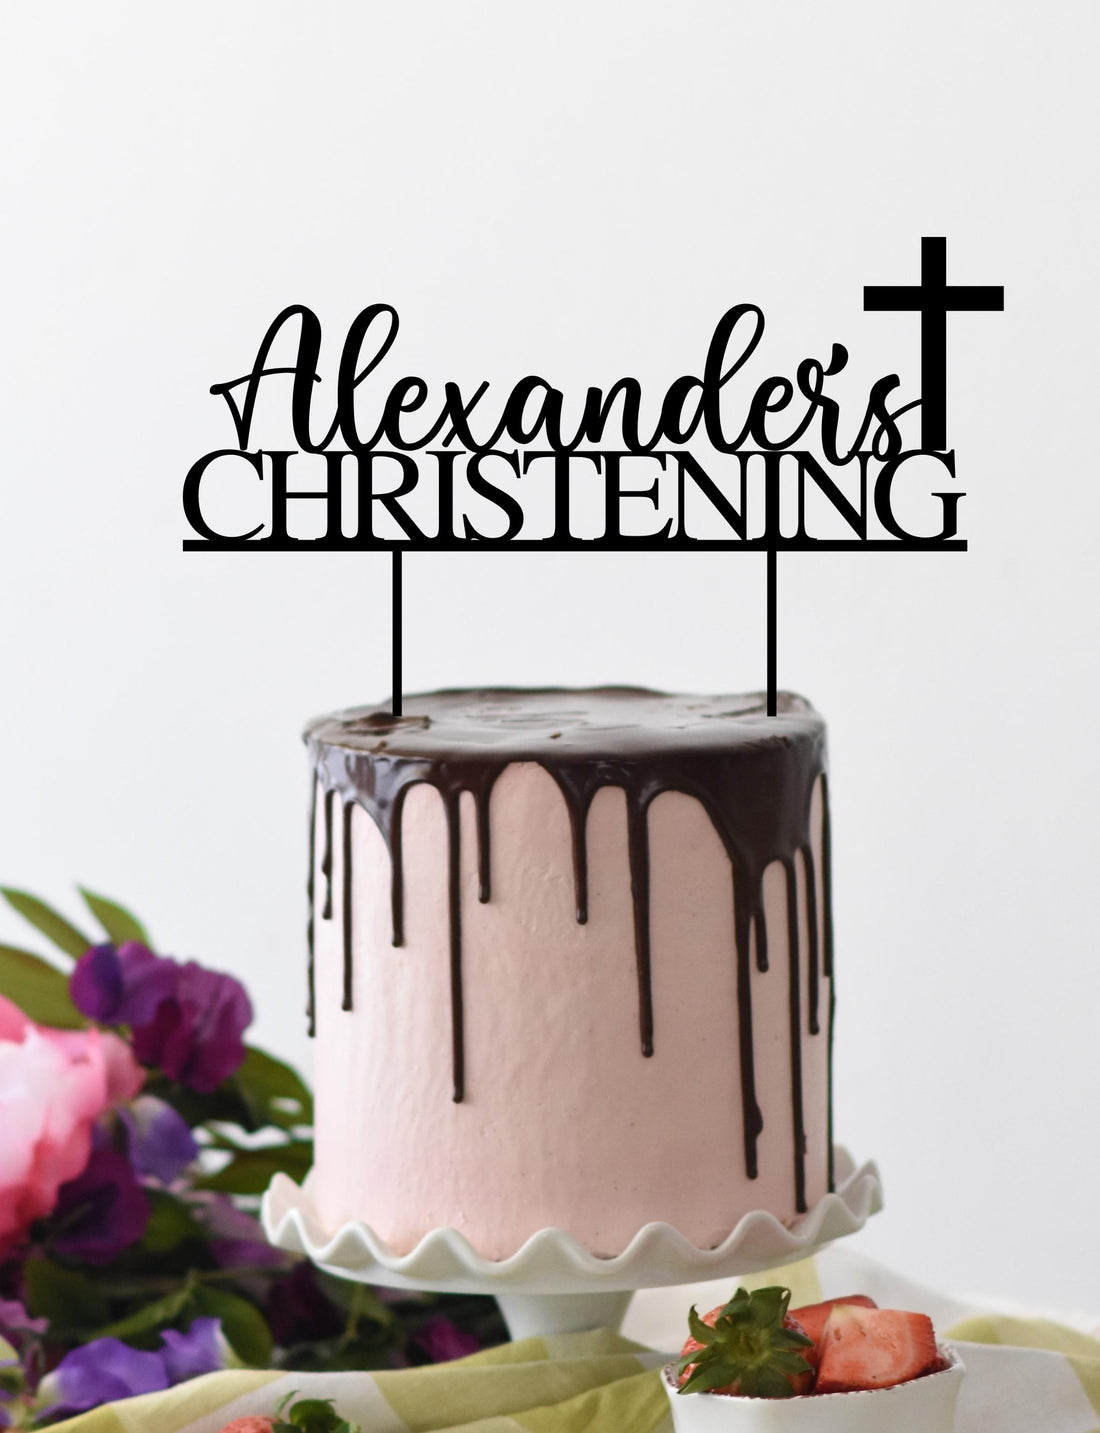 Personalised Christening MDF/ Mirror Acrylic Cake Topper, Custom Cut Out Joint Name Birthday/ Wedding/ Celebration/ Event Party Decor Supply Toppers